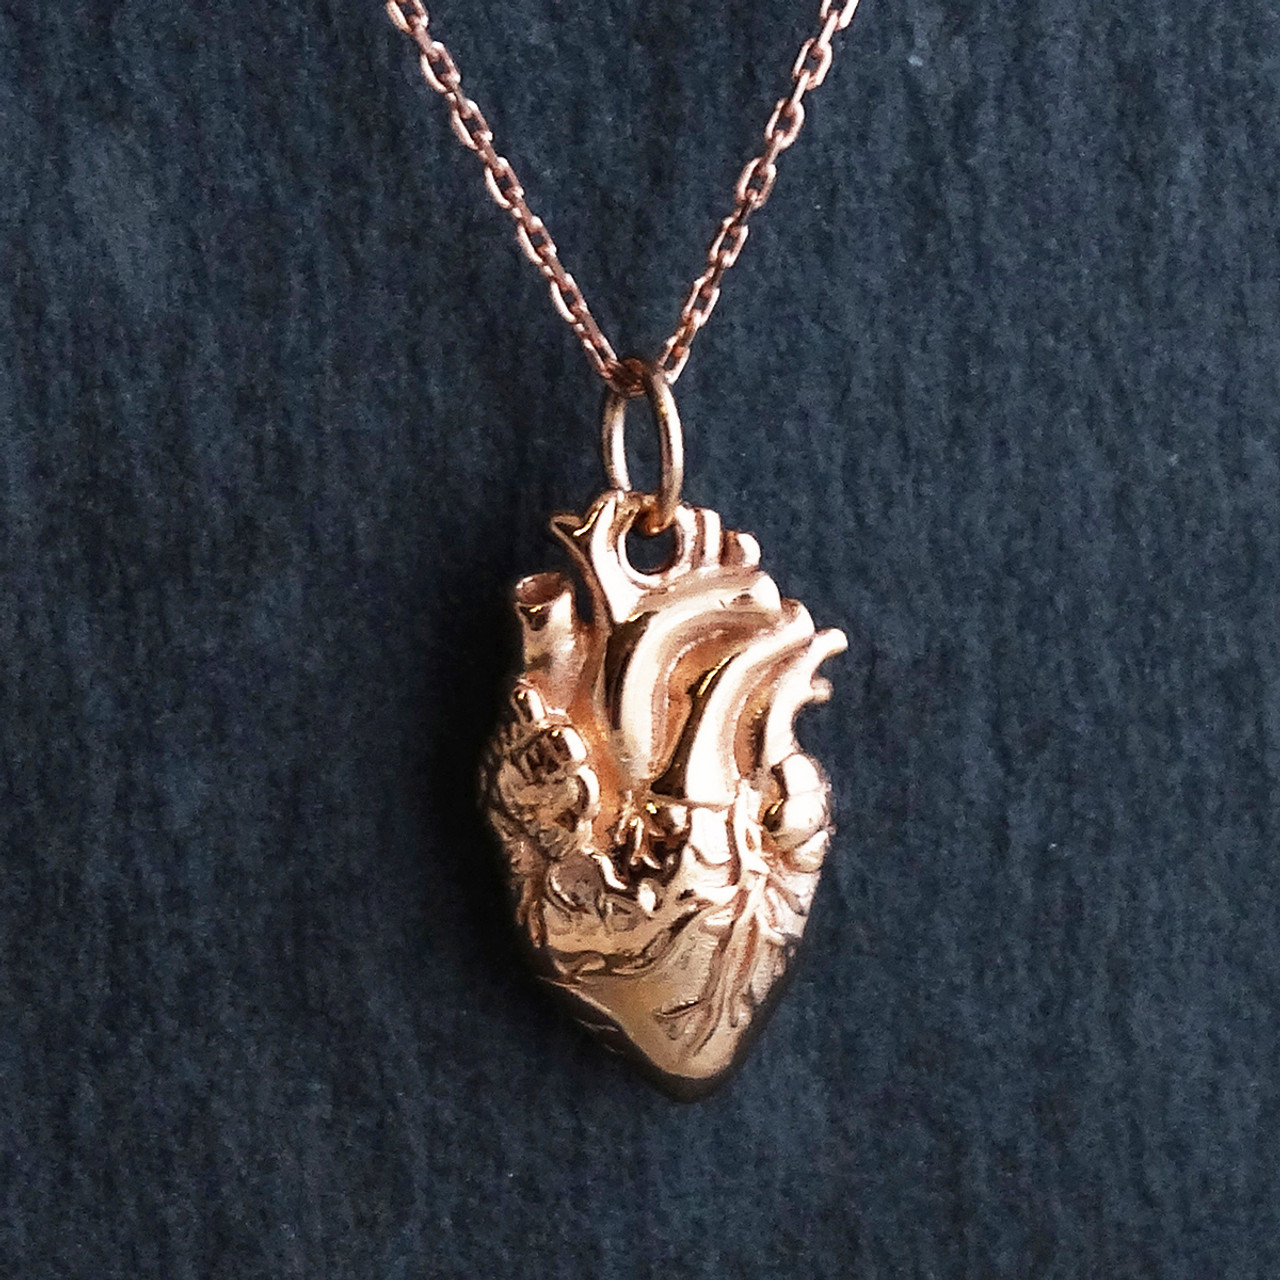 Anatomical Heart Charm Necklace, Rose Gold Plated Sterling Silver ...